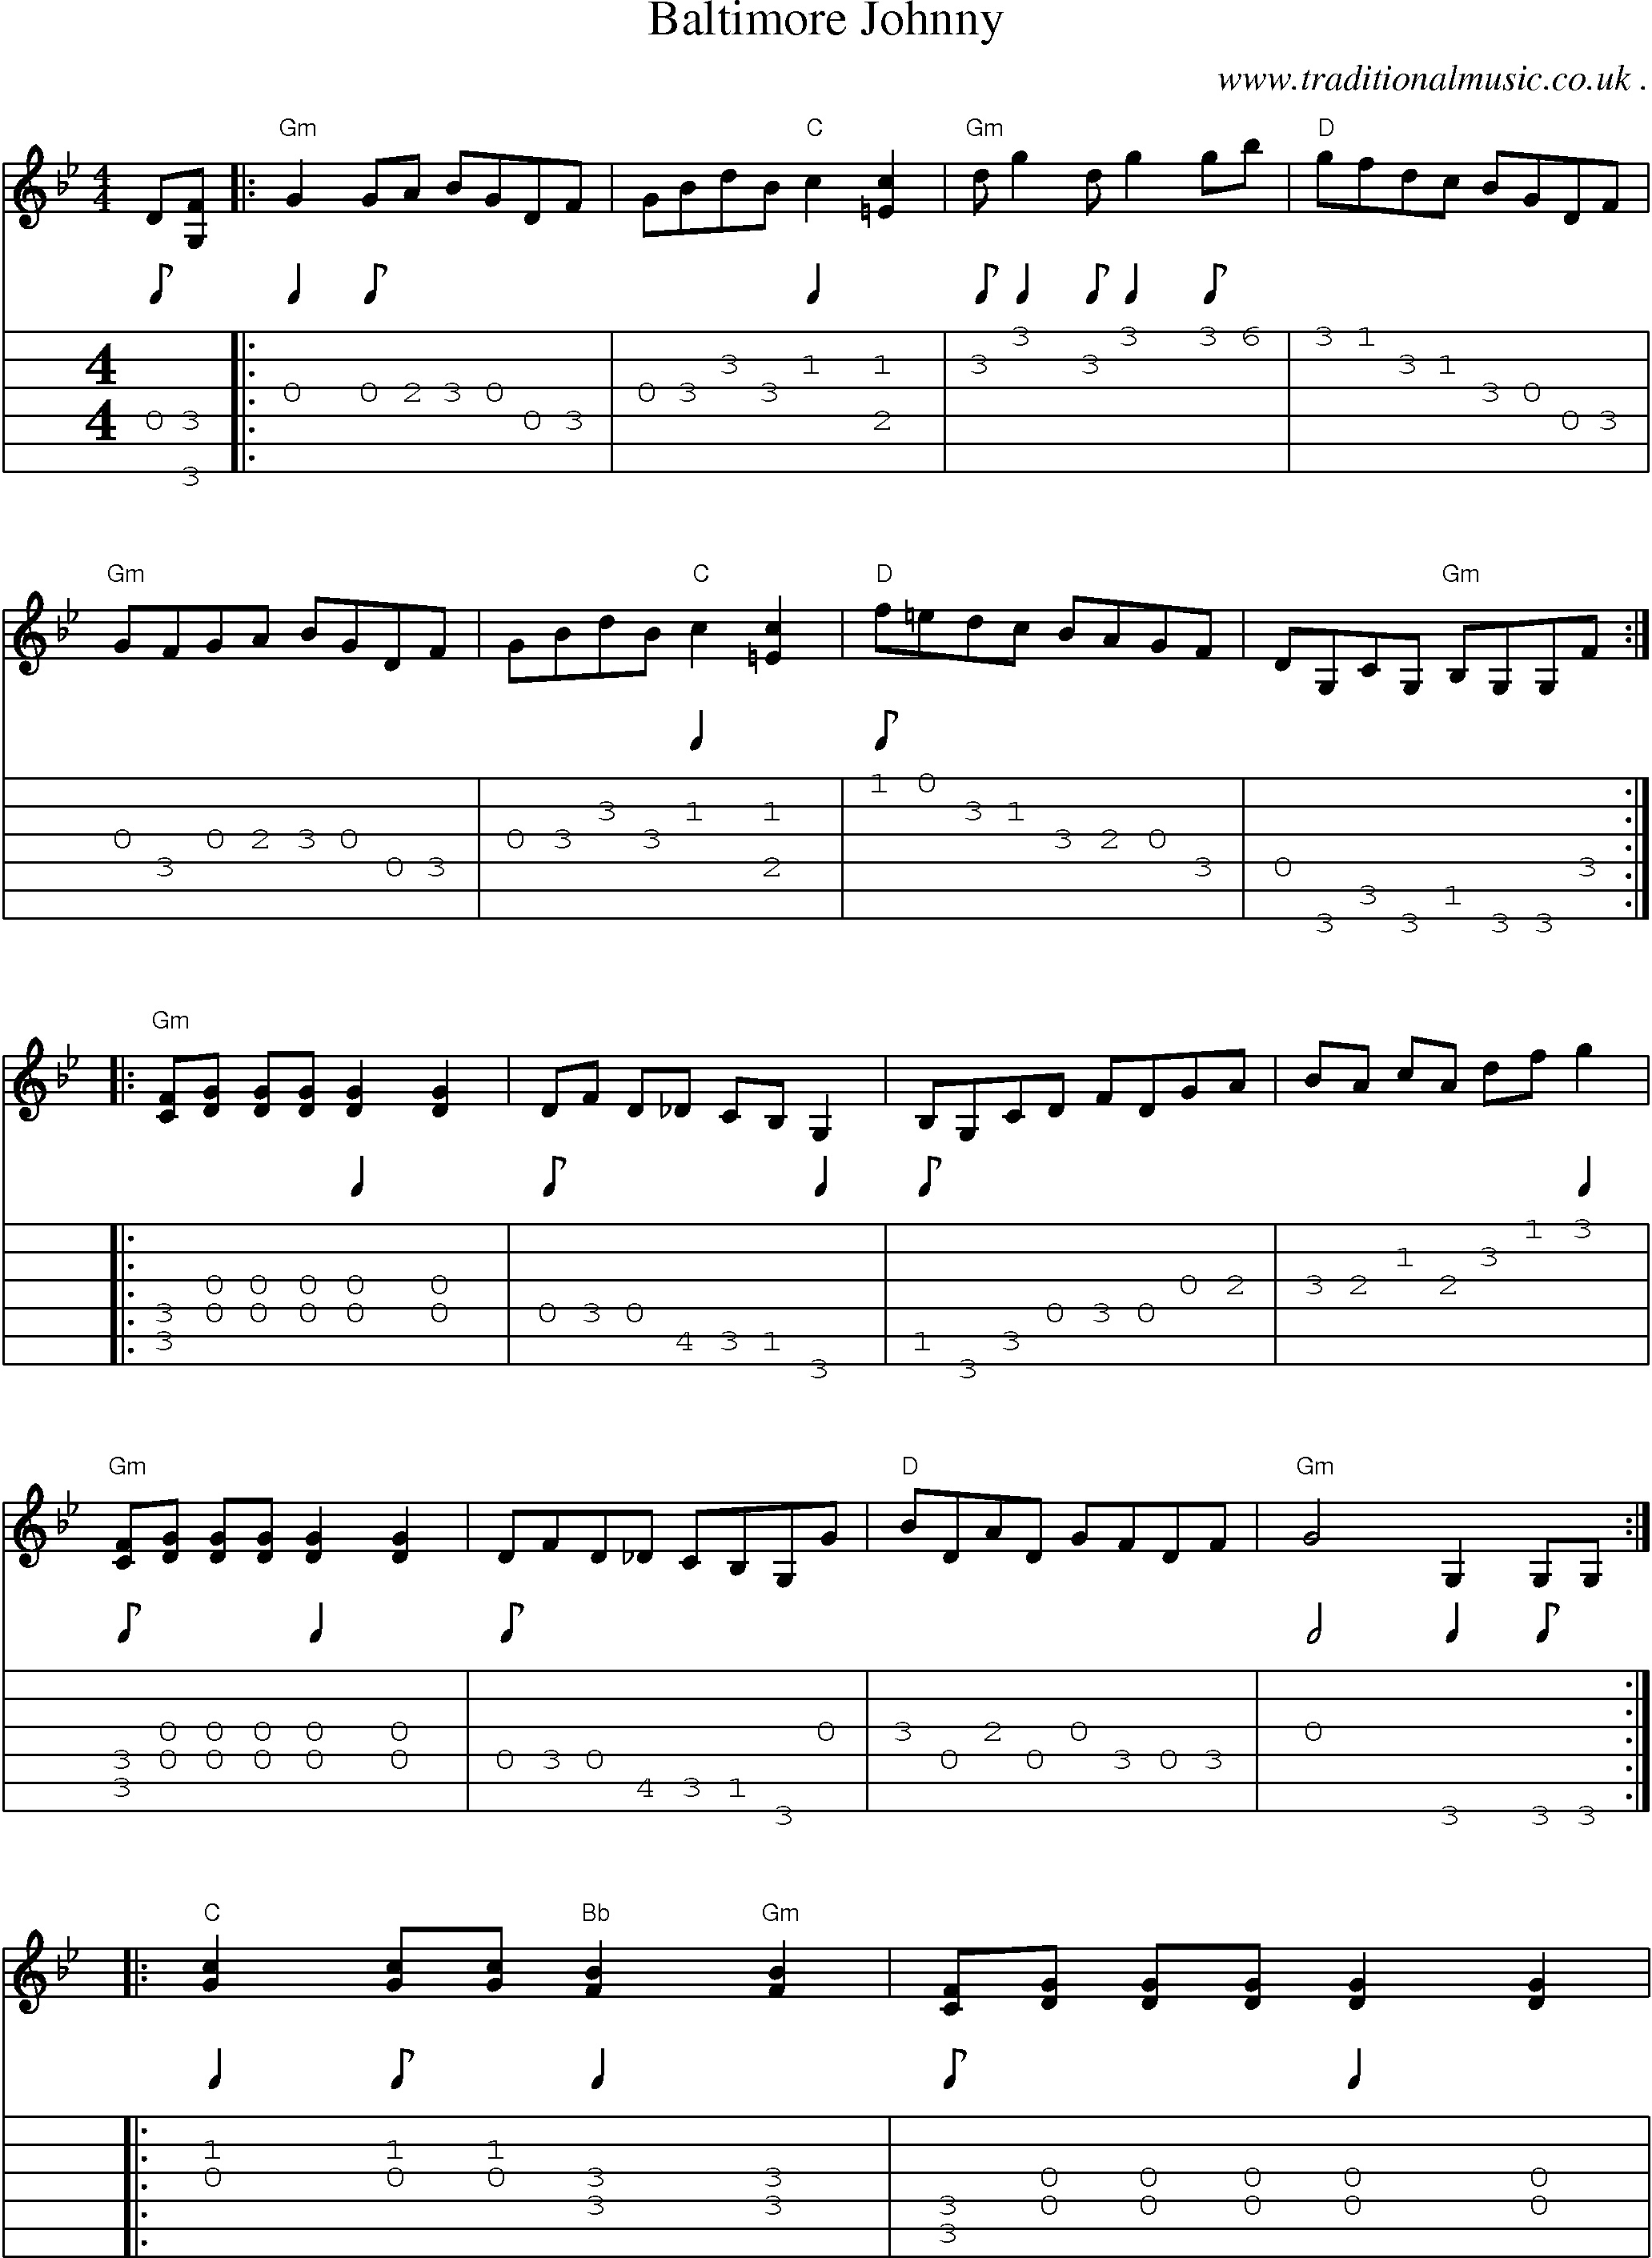 Music Score and Guitar Tabs for Baltimore Johnny